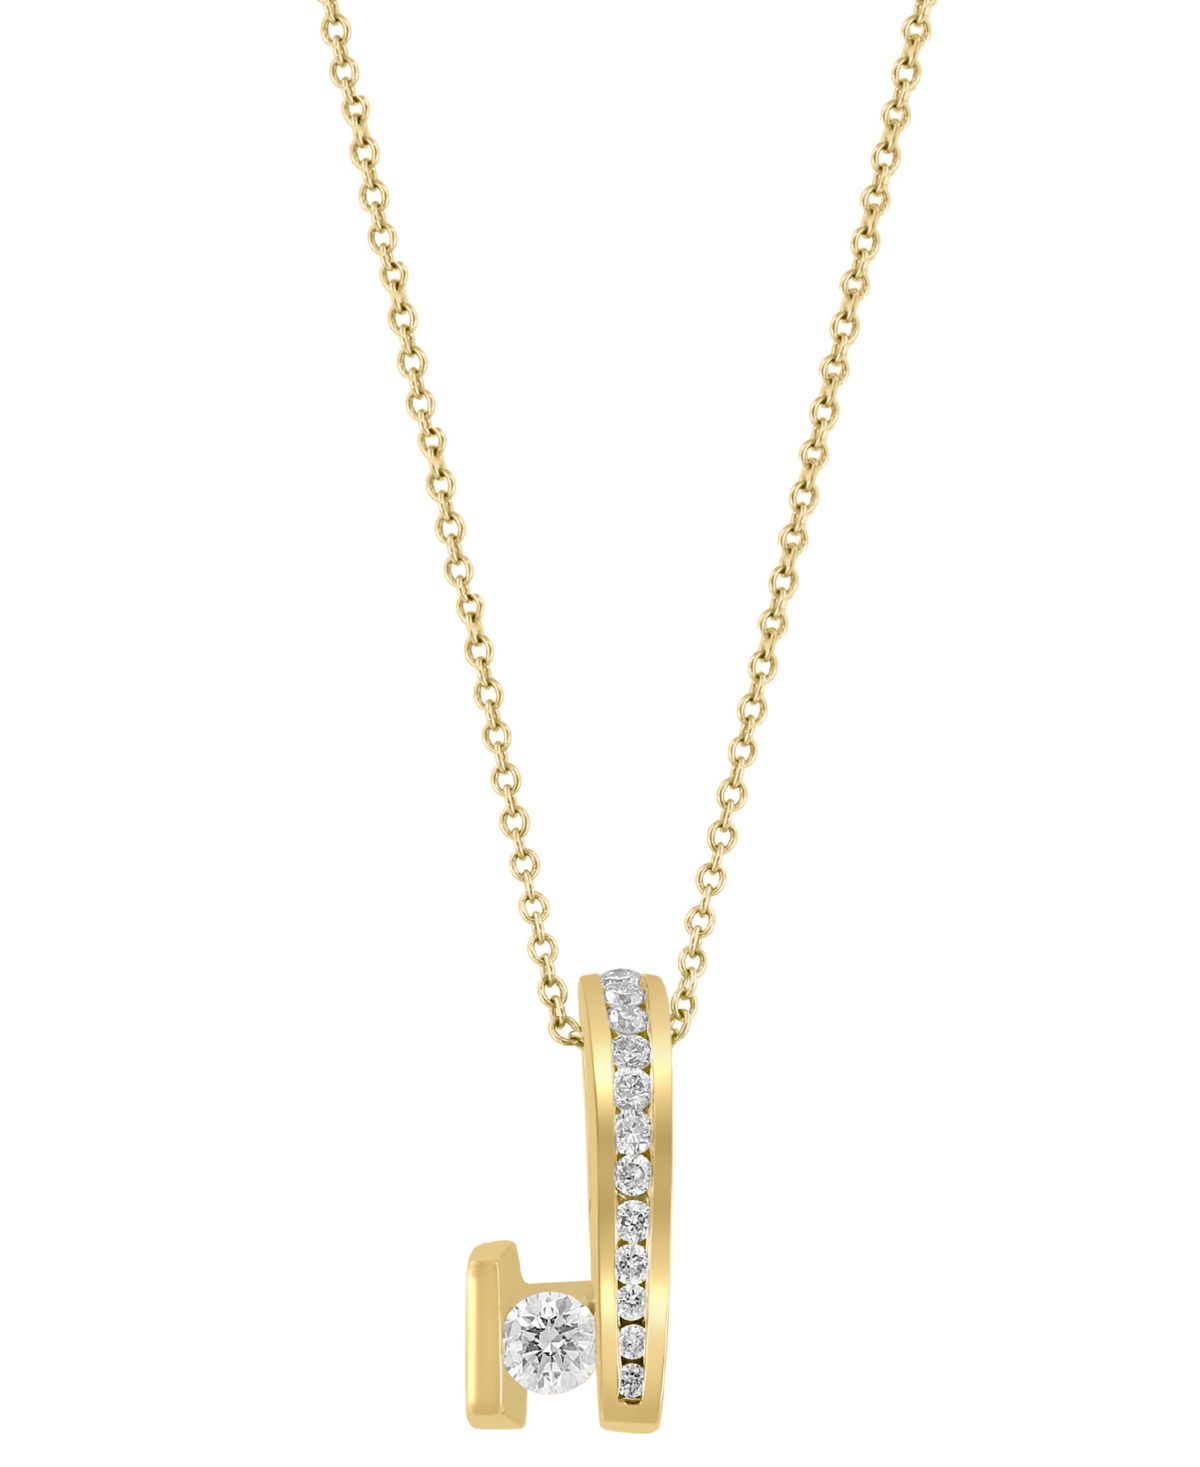 Effy Diamond Abstract Form 18" Pendant Necklace (1/2 ct. t.w.) in 14k Gold - Yellow Gol